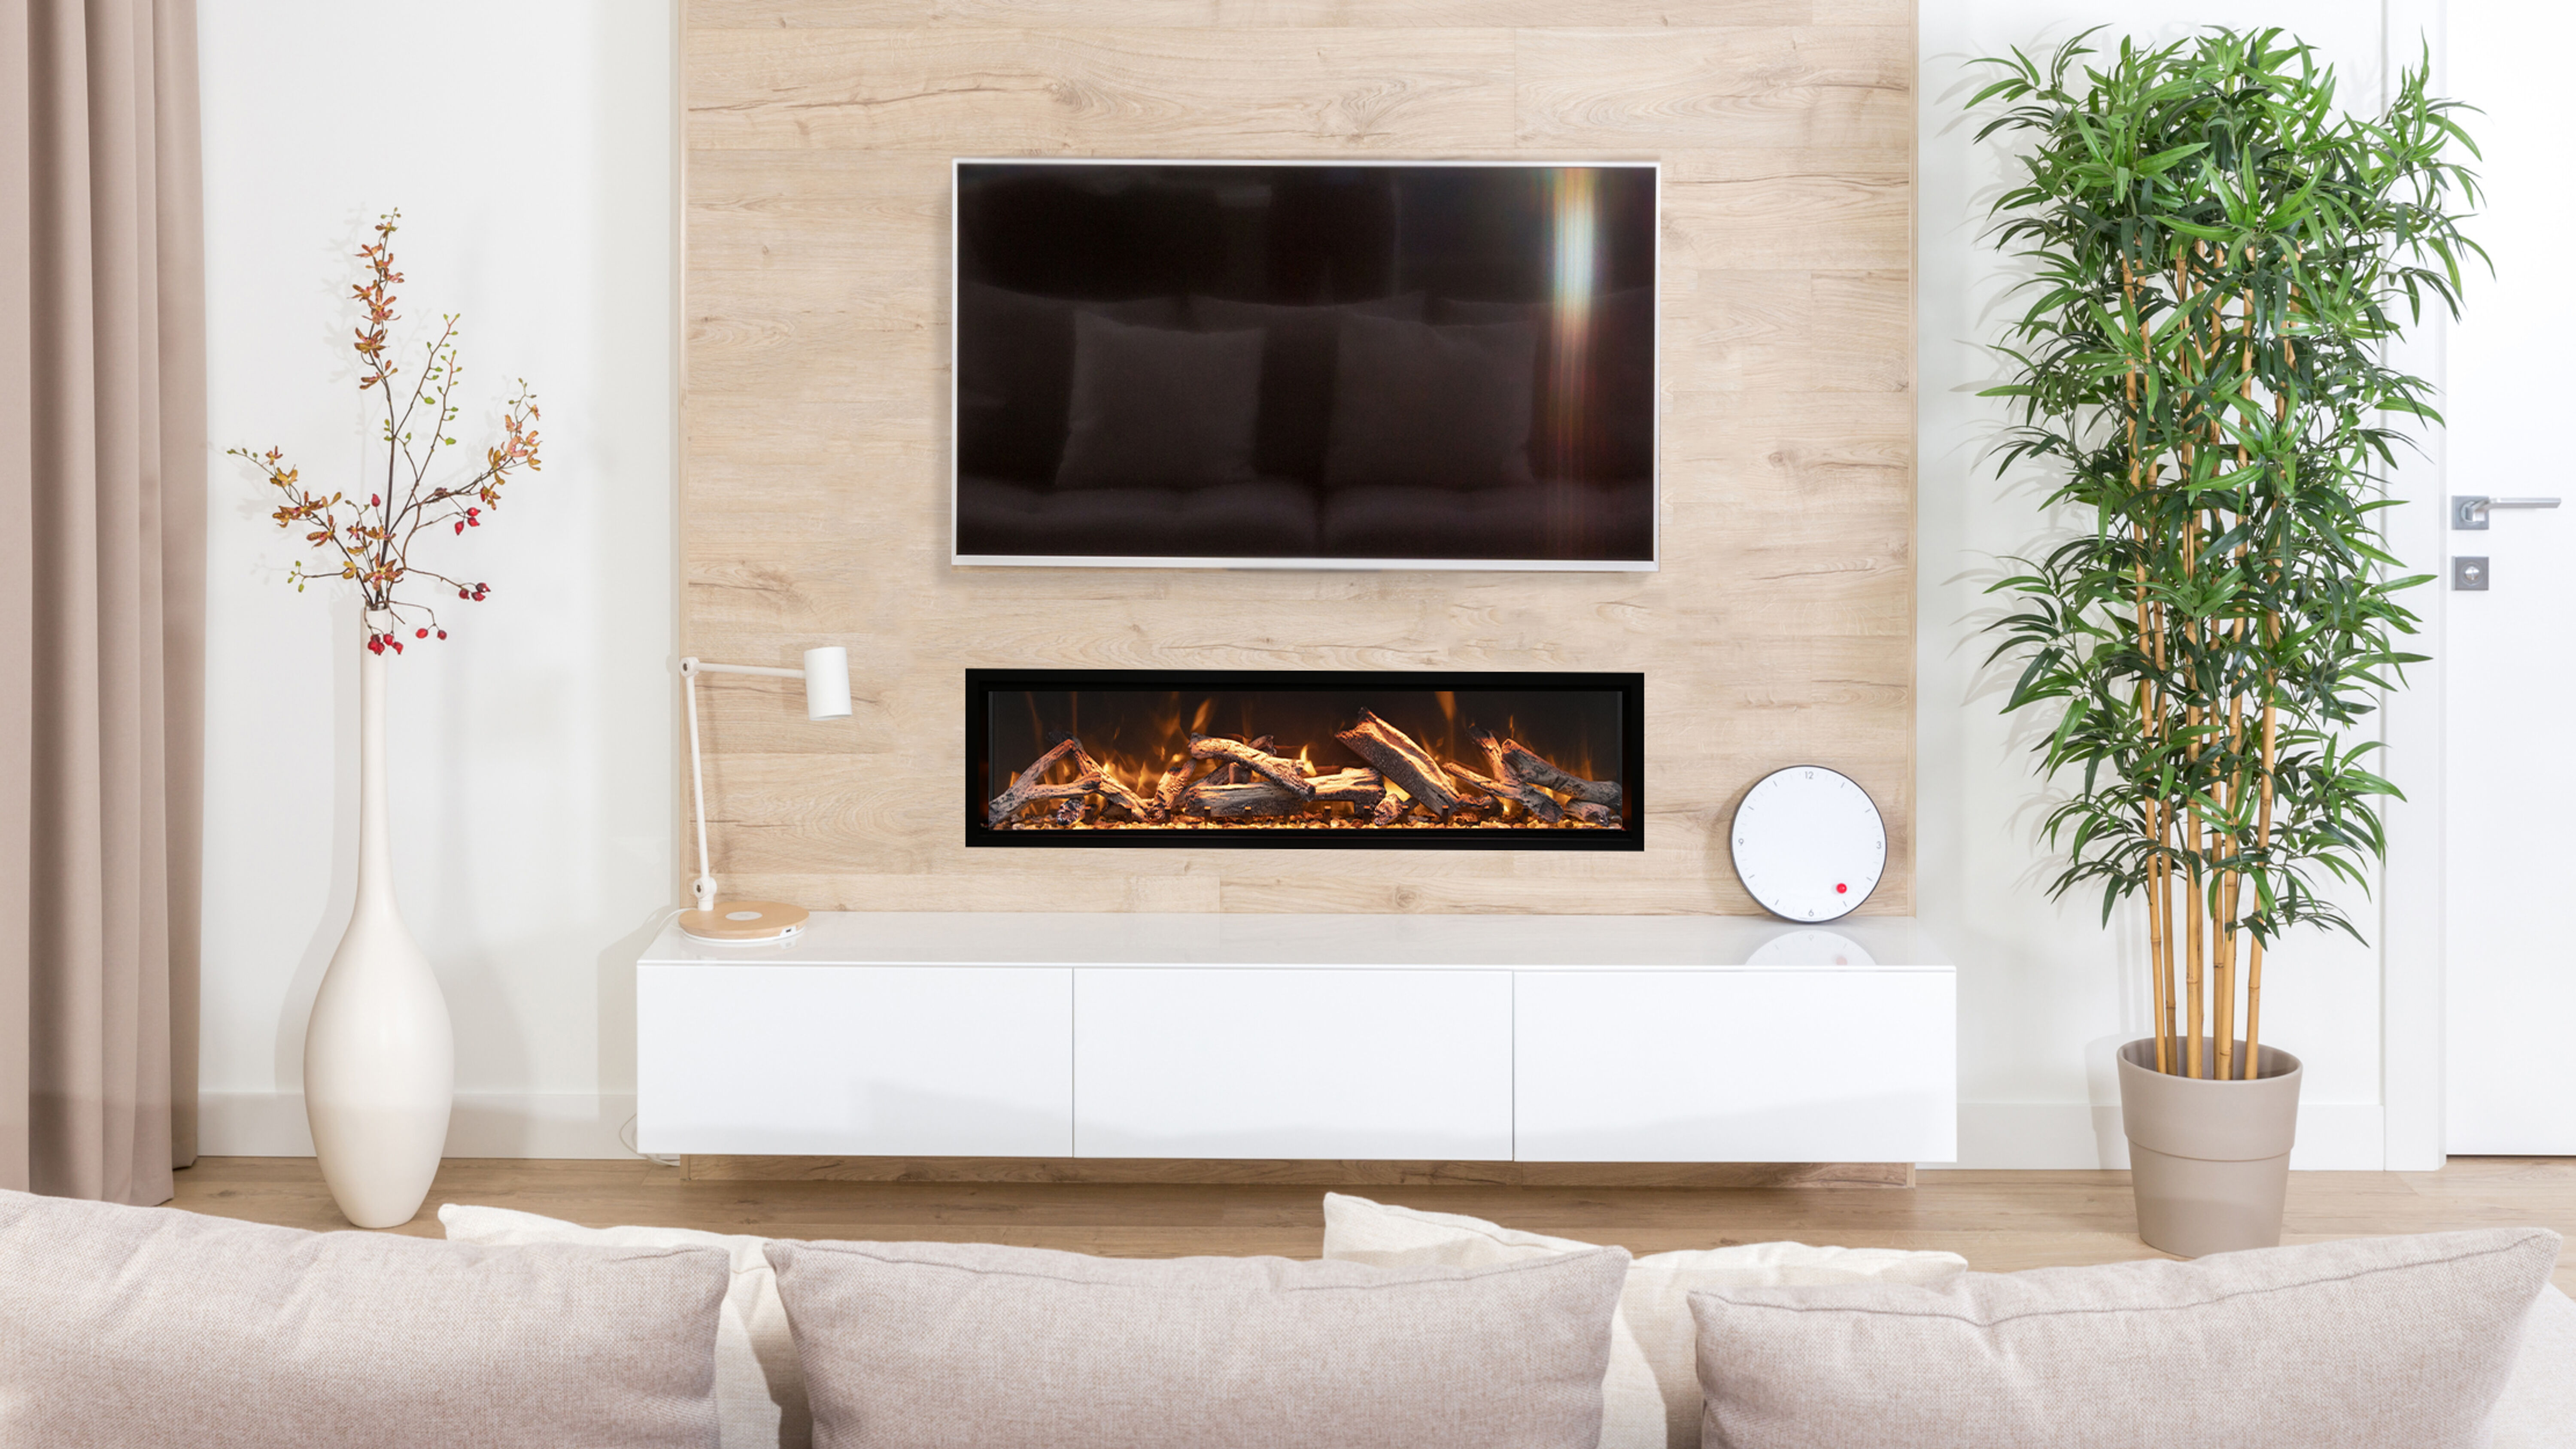 A modern living room with neutral-colored furniture, white walls, a tall floor plant, a linear gas fireplace, and a flatscreen TV.